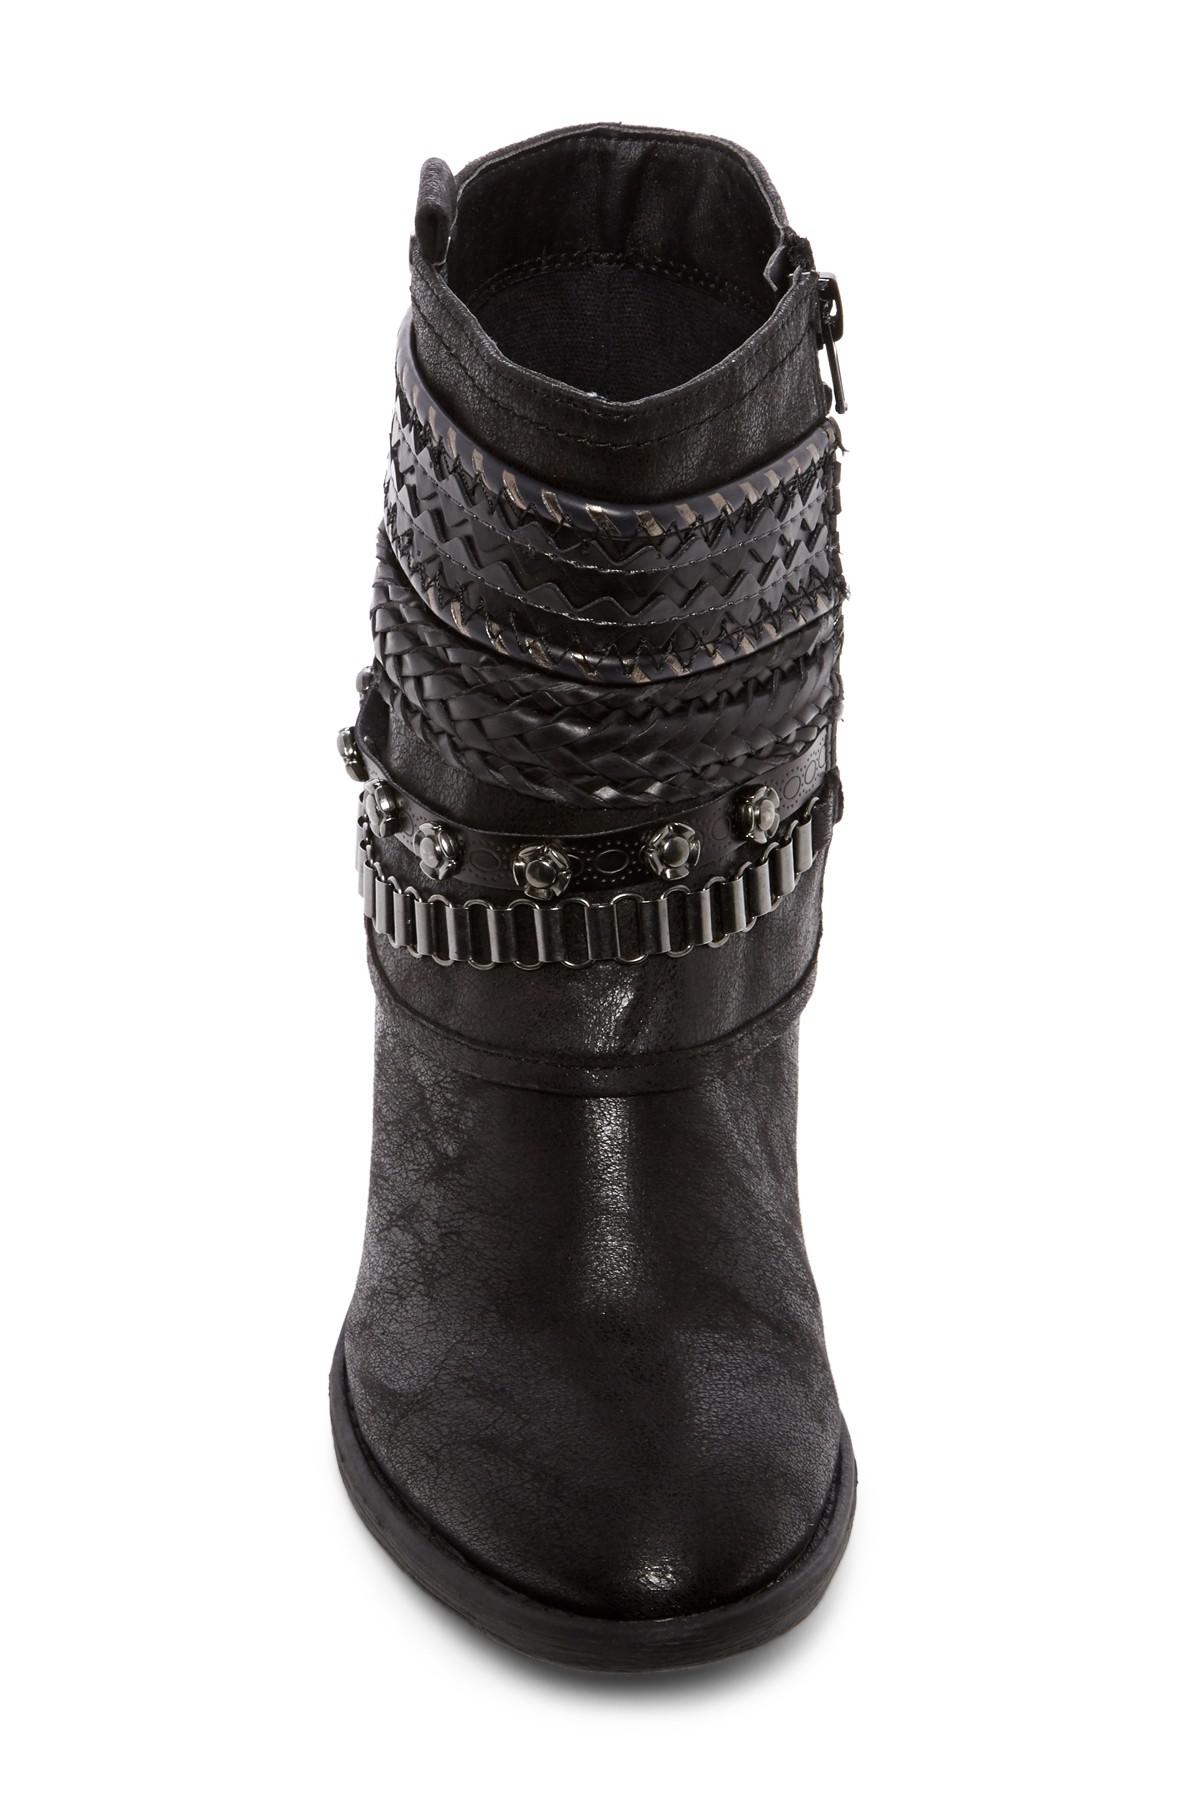 Carlos By Carlos Santana Cole Belted Boot in Black | Lyst